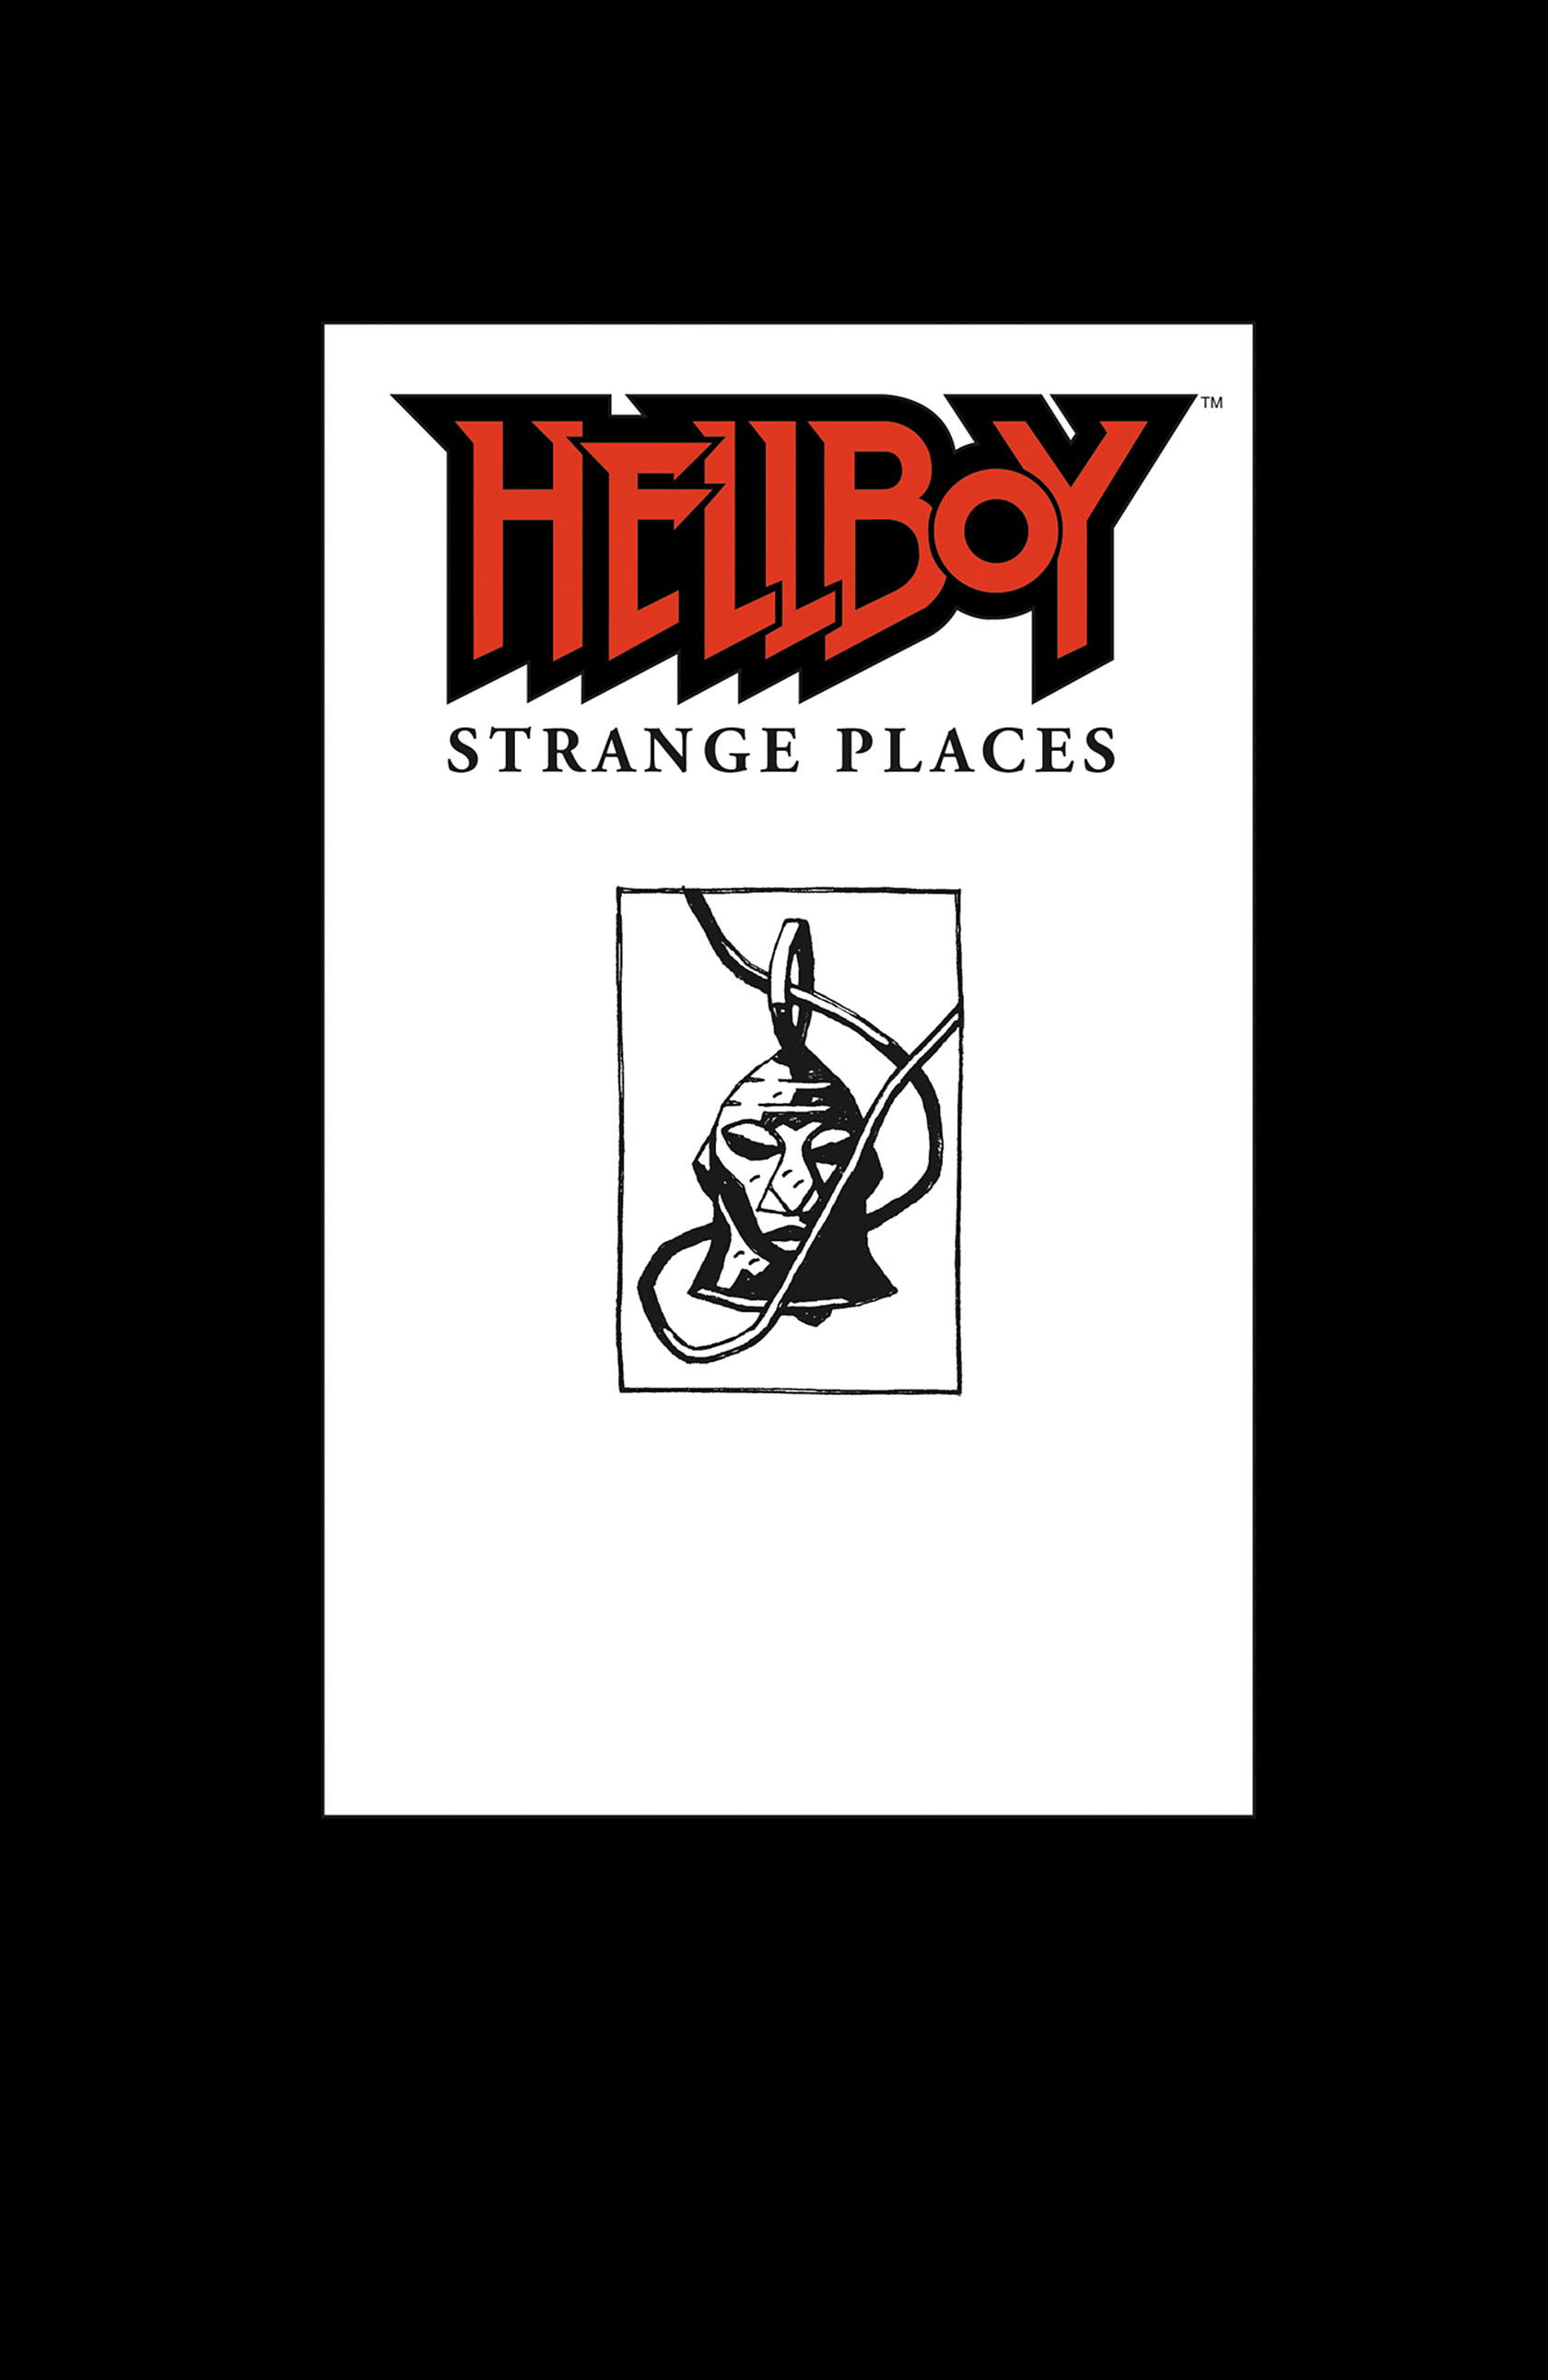 Read online Hellboy: Strange Places comic -  Issue # TPB - 2